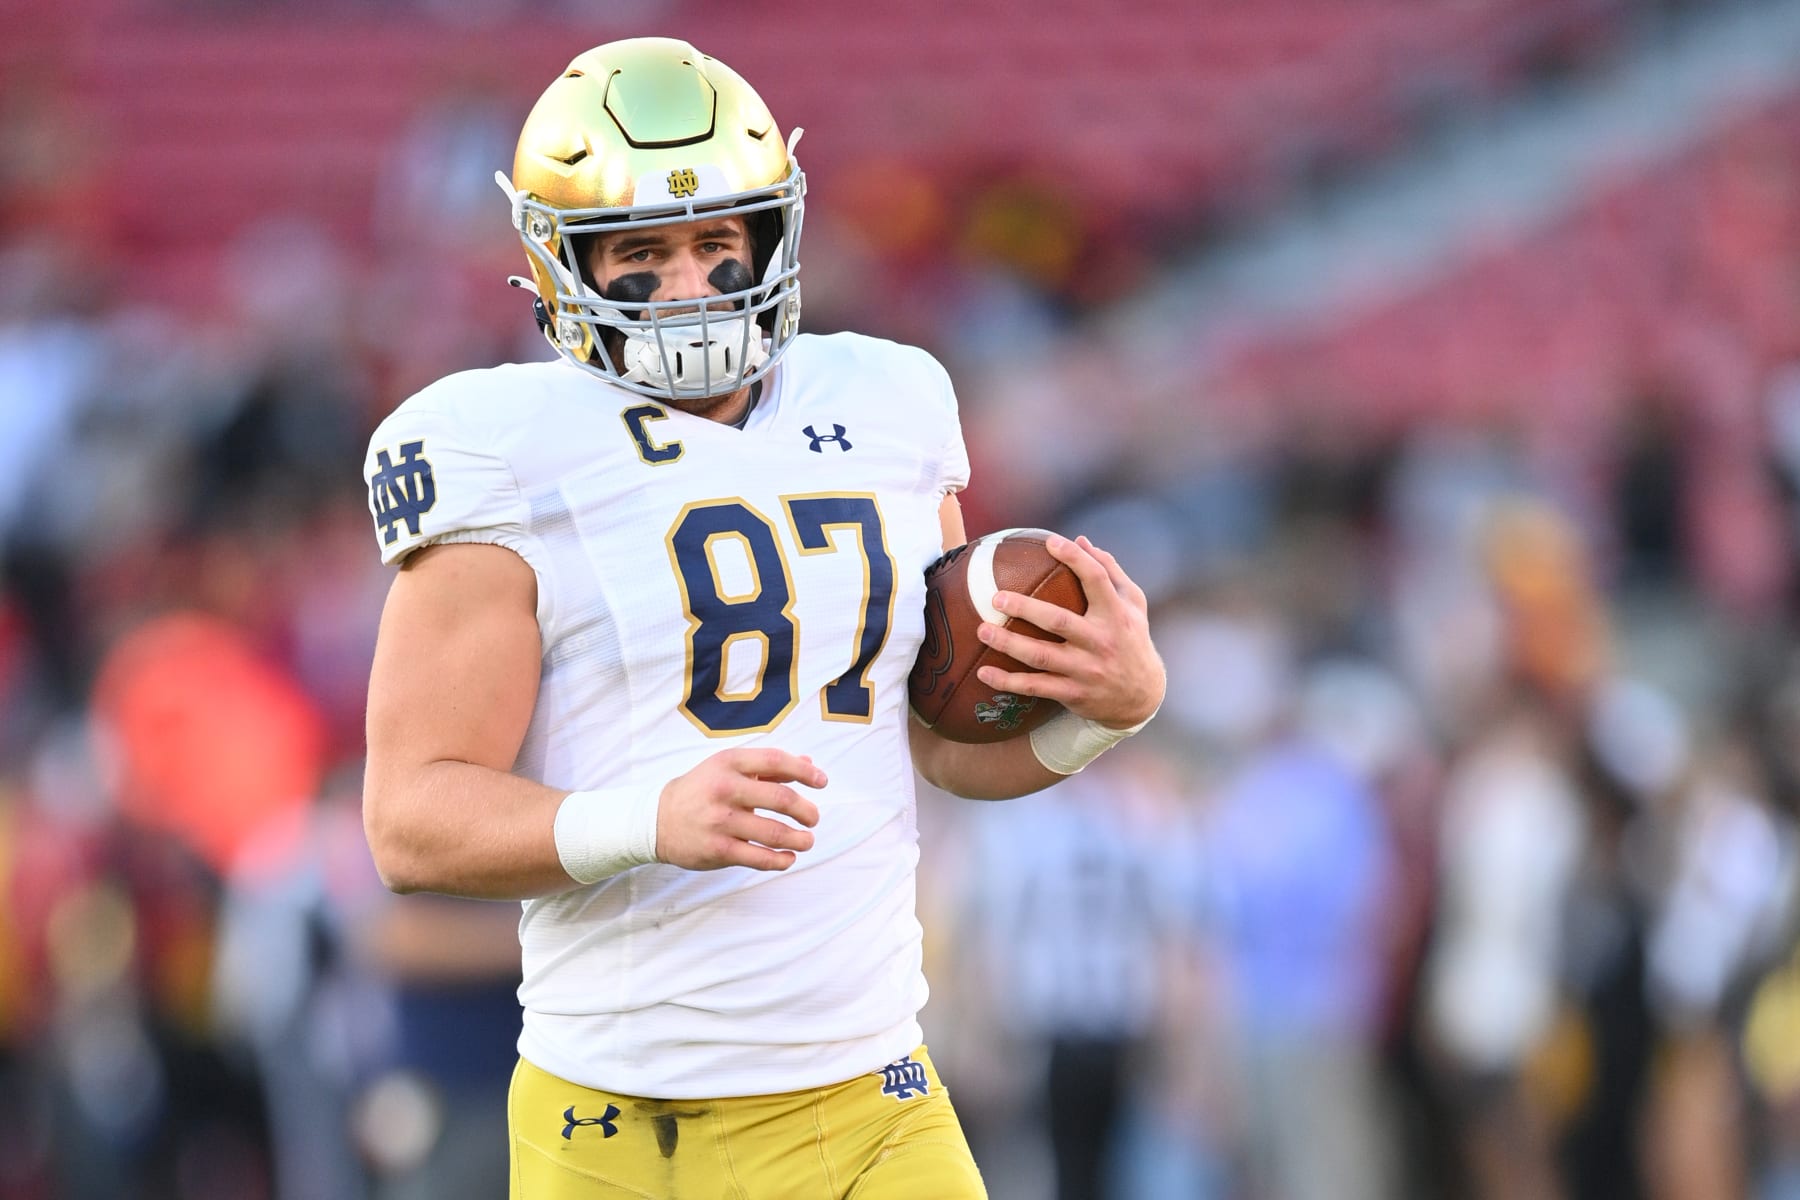 2023 NFL Draft Prospect Positional Rankings & Player Comps